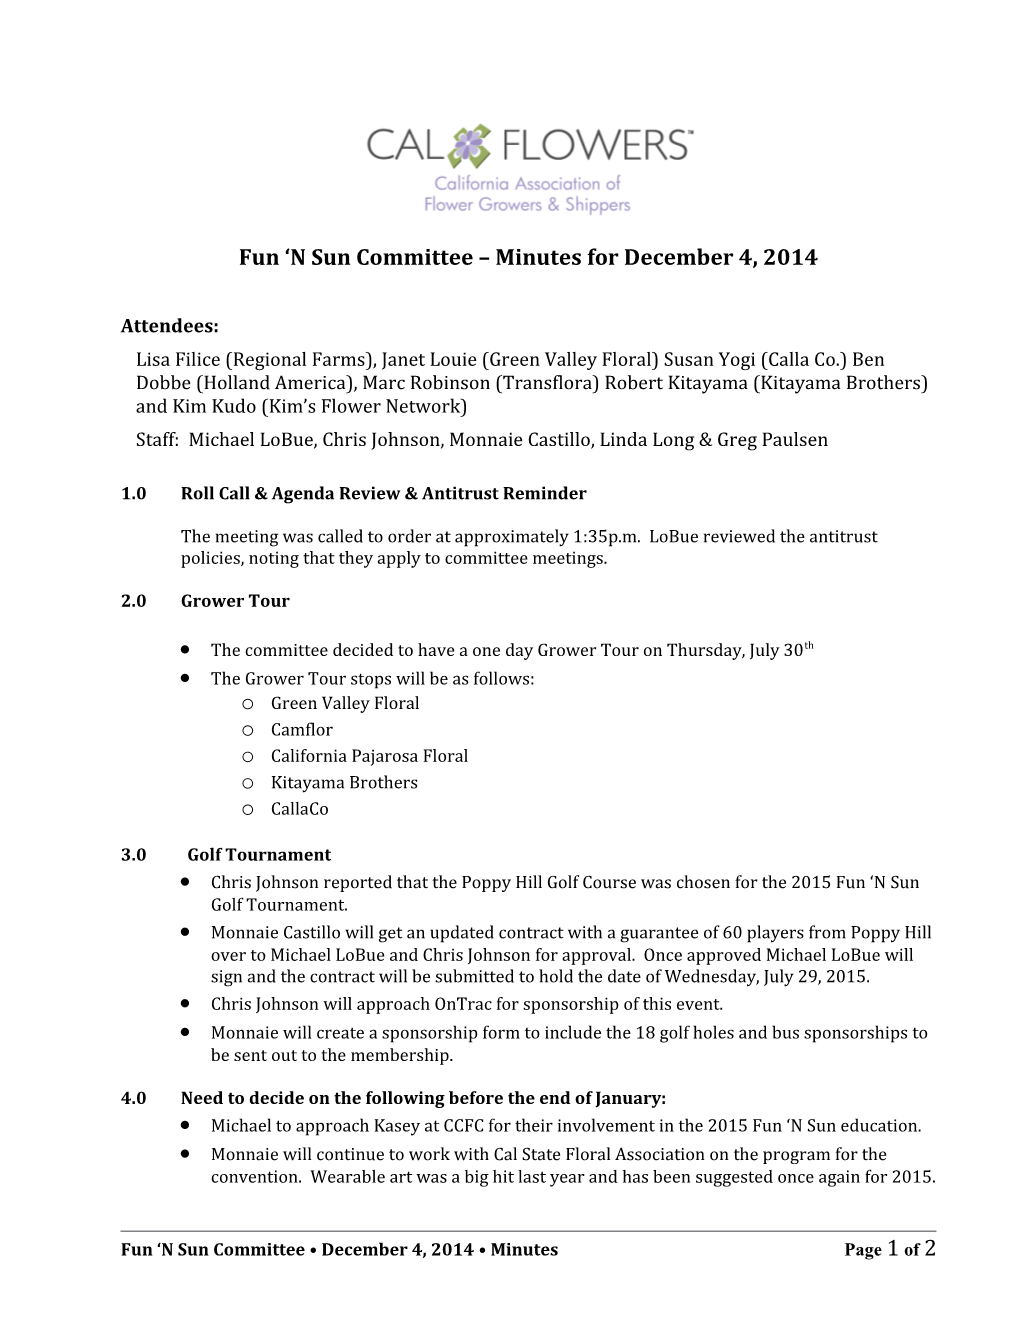 Fun N Sun Committee Minutes for December 4, 2014